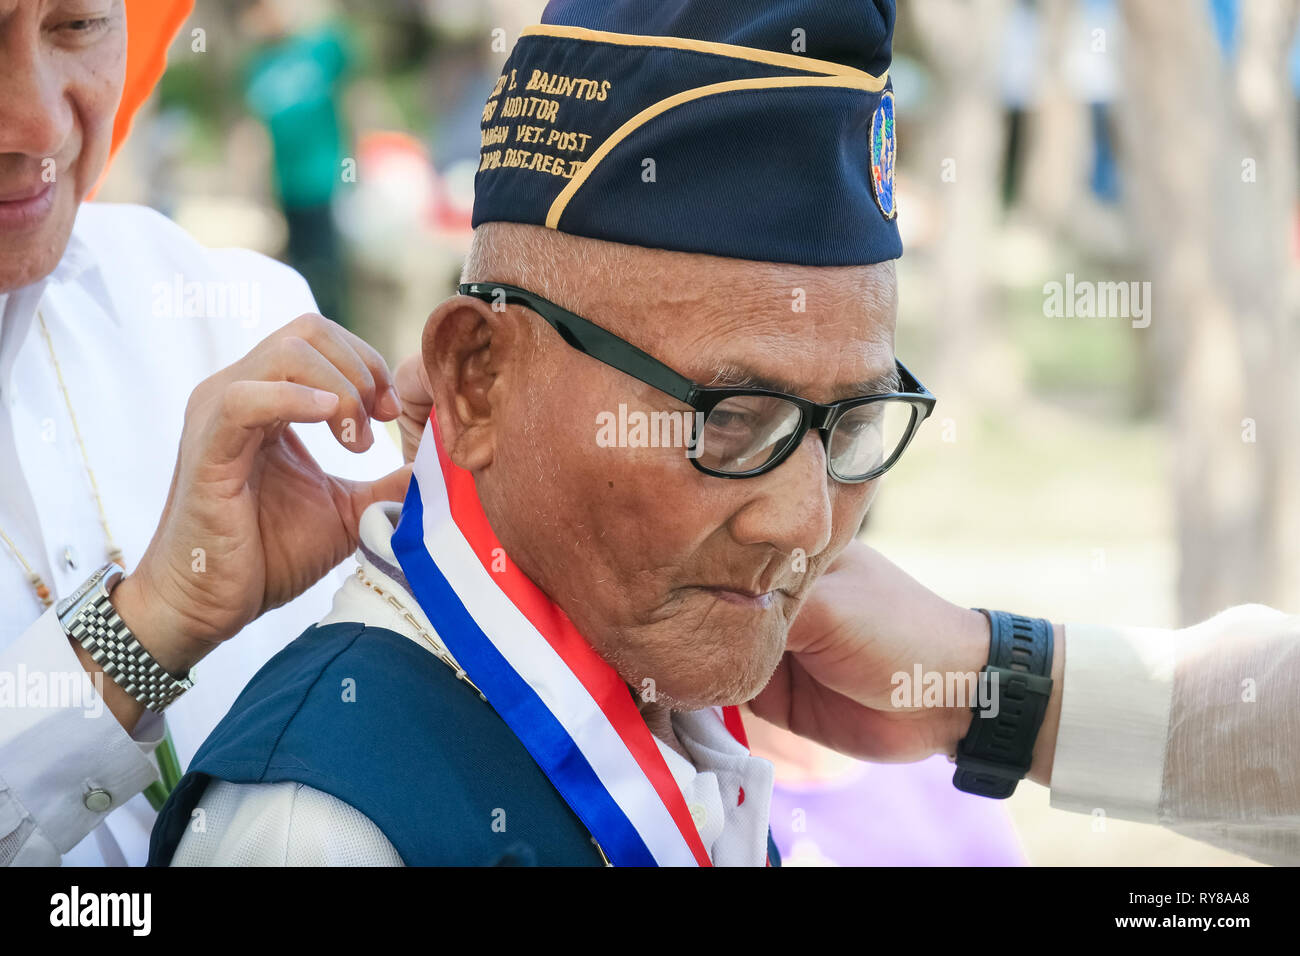 WWII Soldier being Awarded by  Philippine Veterans Affairs Office - 74th Bataan Day Anniversary - Capas Shrine, Tarlac, Philippines Stock Photo